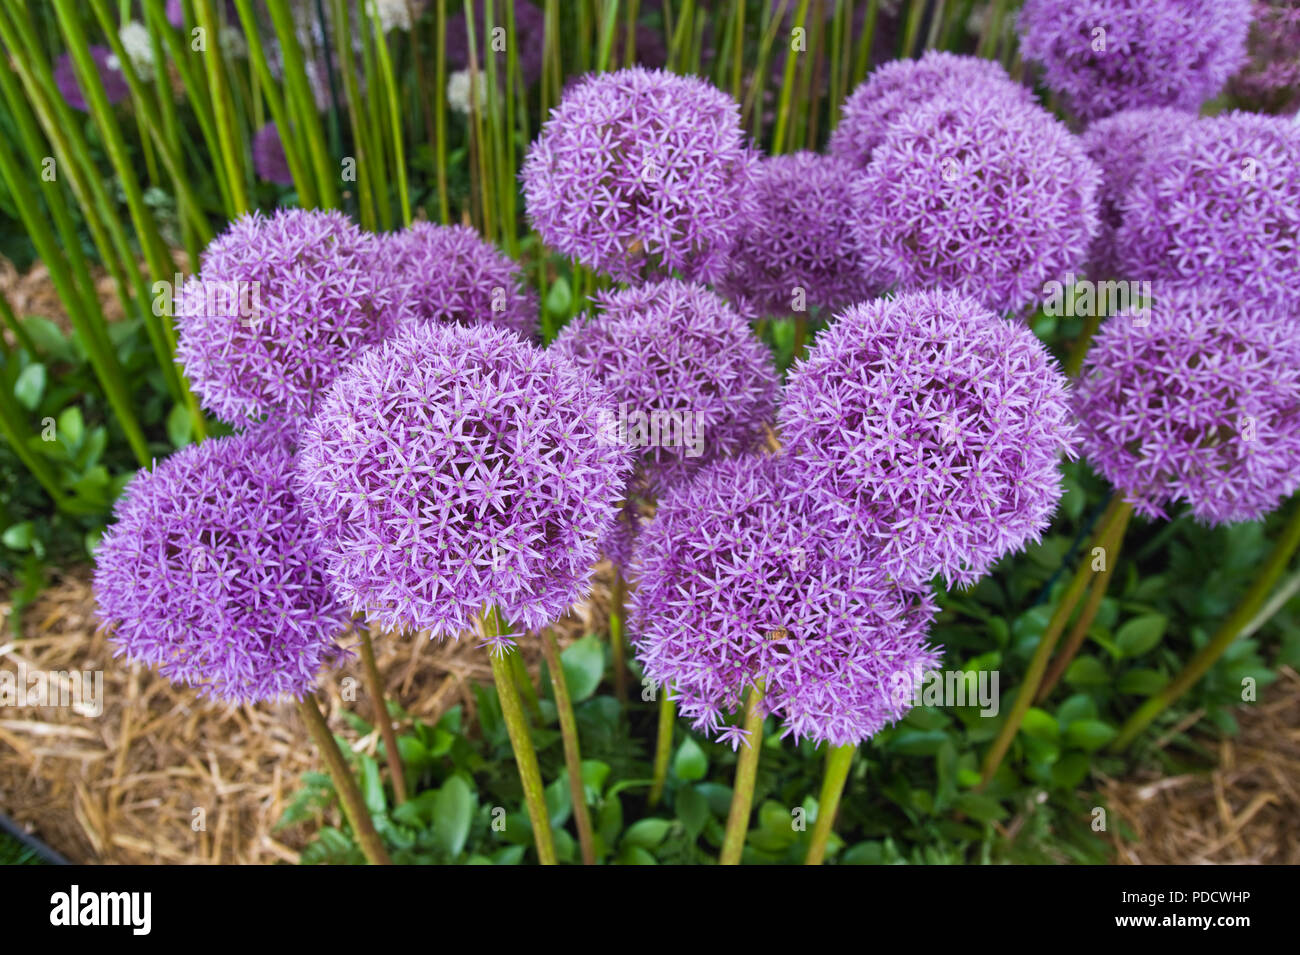 Display of alliums at RHS Tatton Park flower show Cheshire England UK Stock Photo